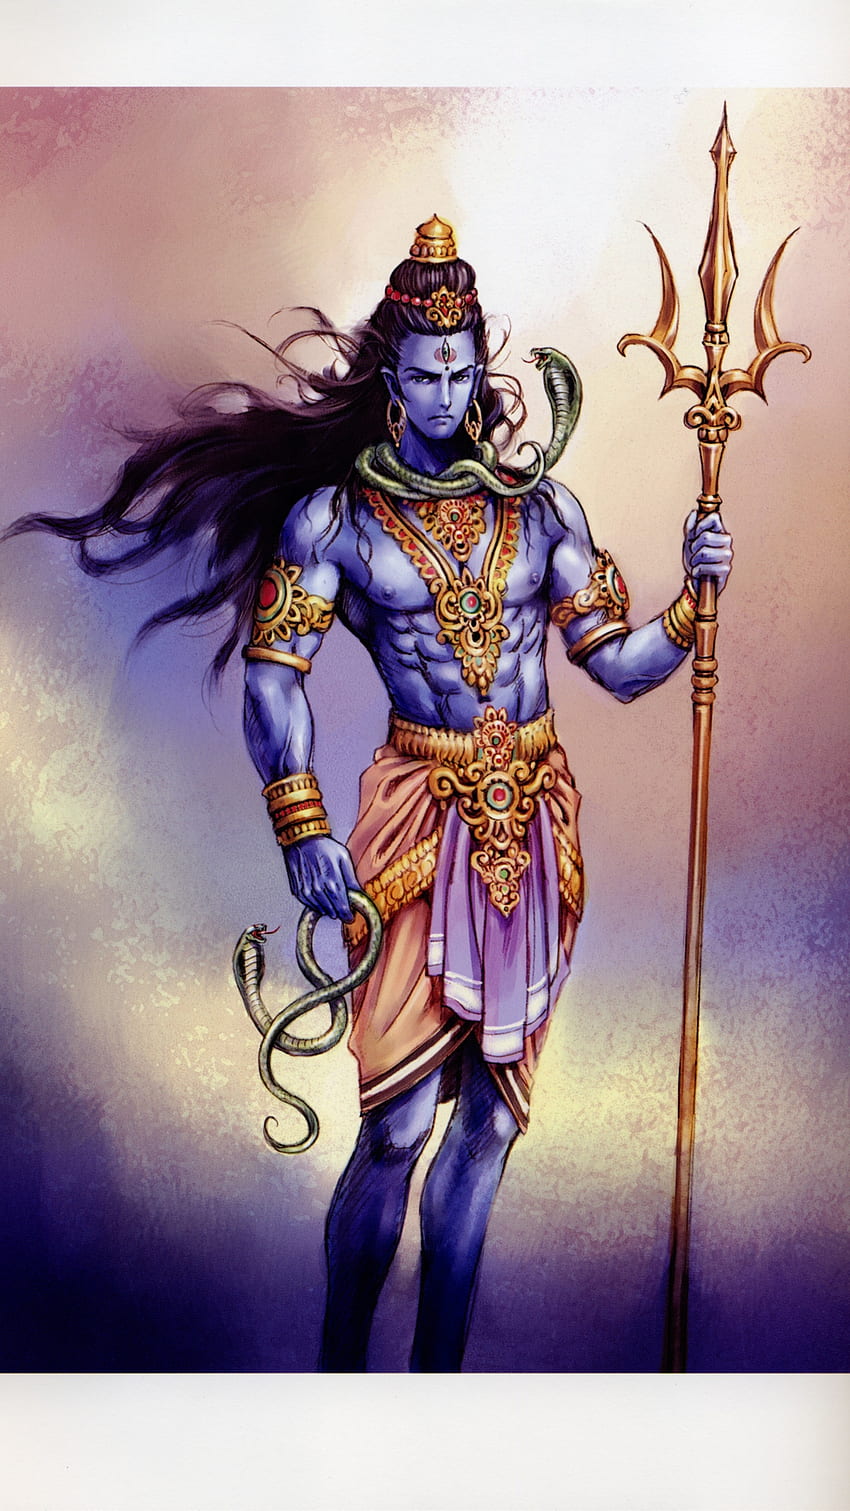 Download Lord Shiva Hd Trident And Beads Wallpaper | Wallpapers.com